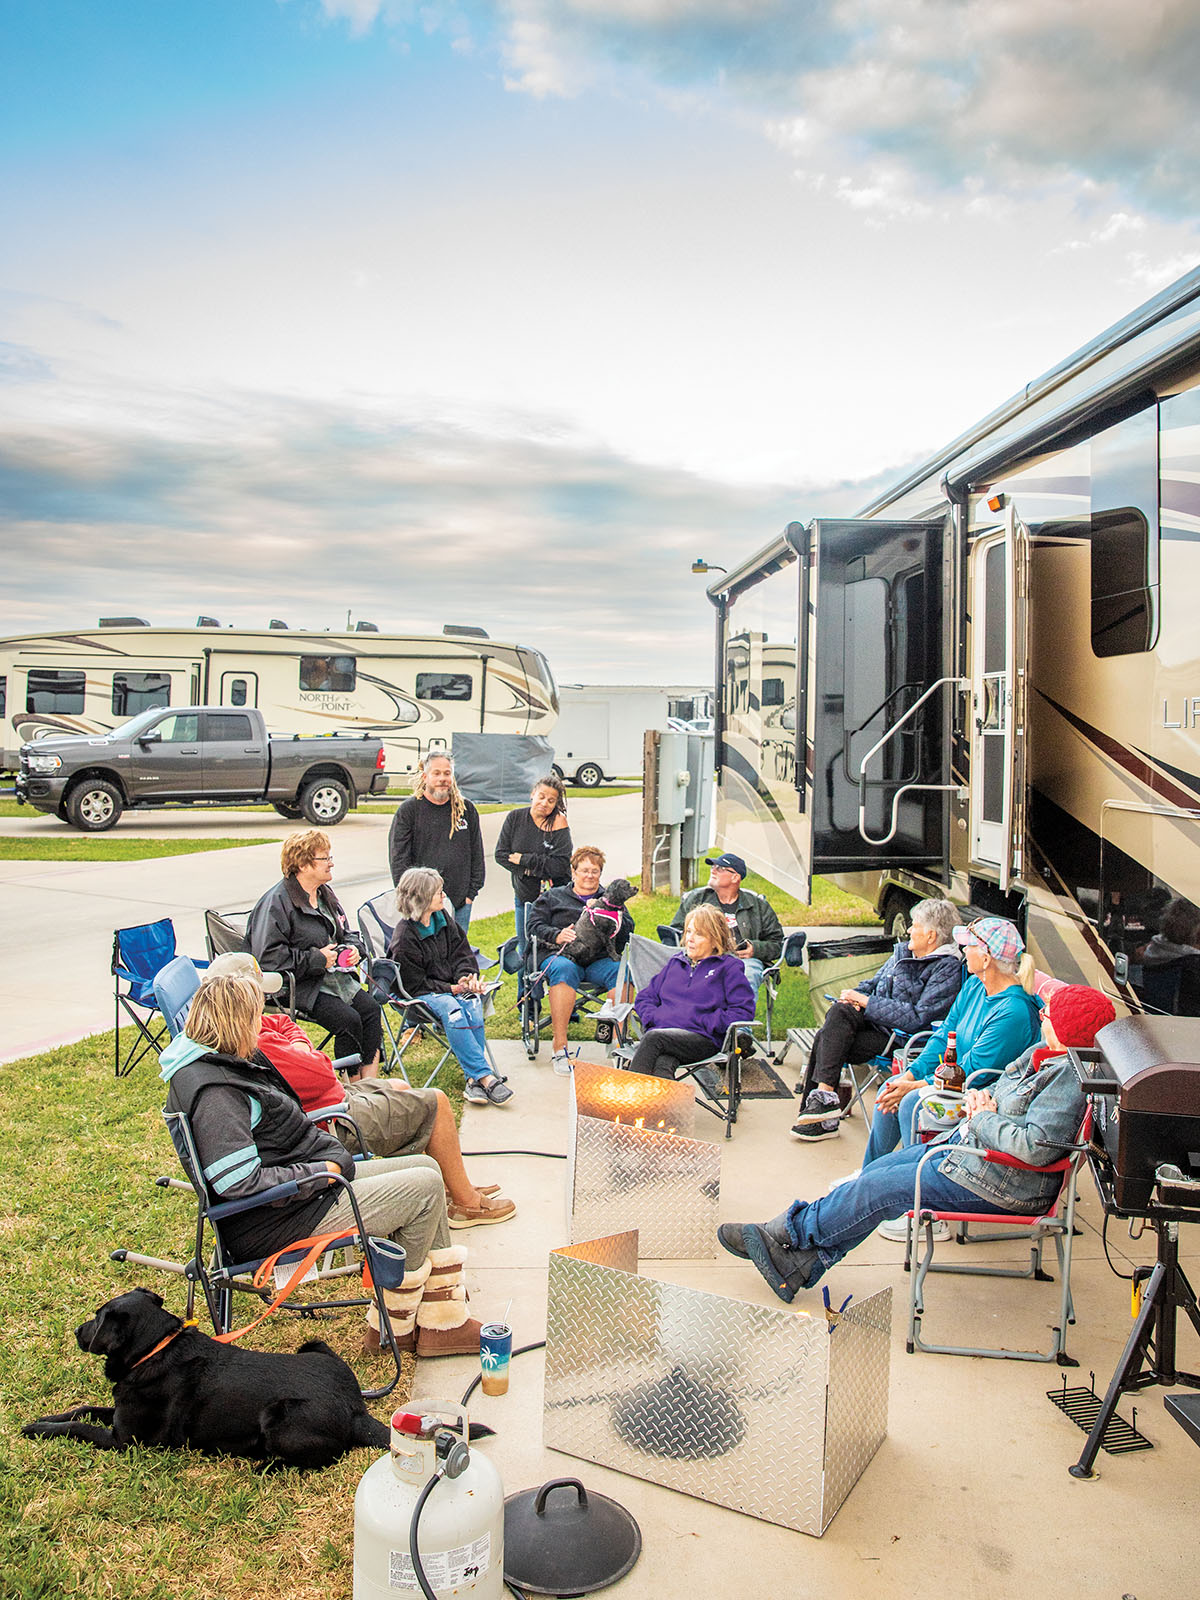 A group of people sit in folding chairs in front of an RV, enjoying drinks and conversation around two gas fire pits